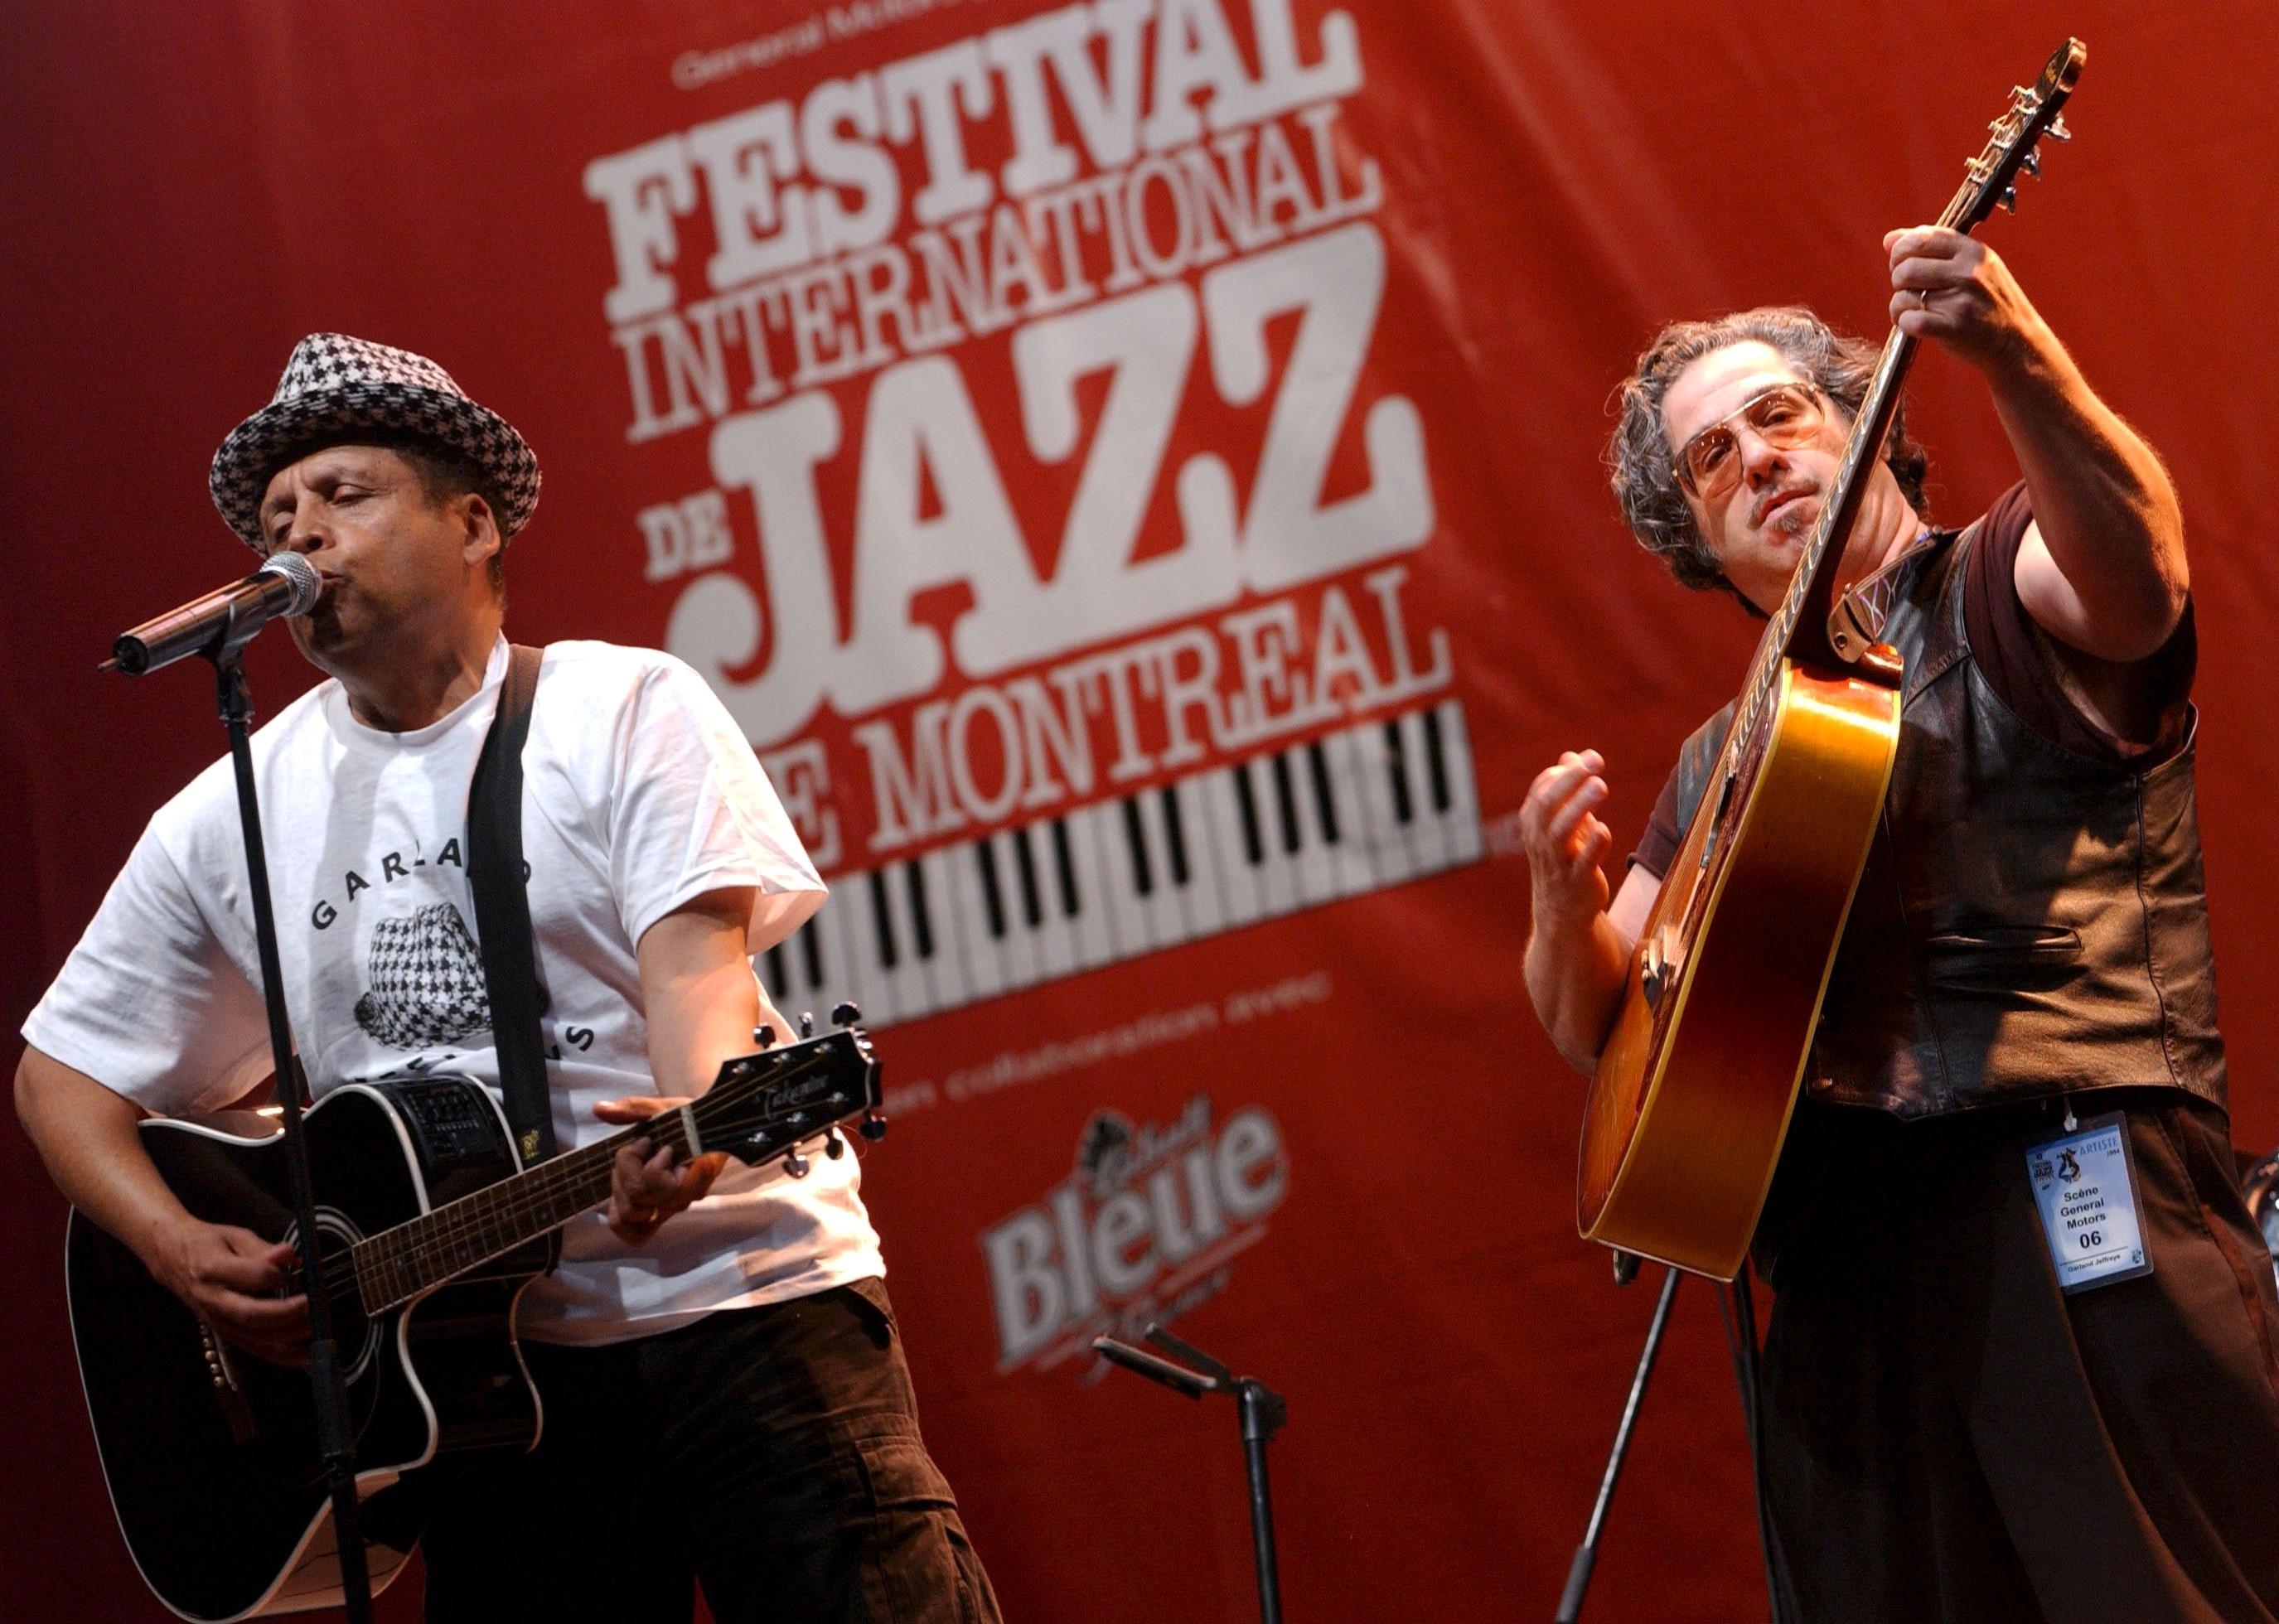 <p>On its 25th anniversary, this popular concert event drew a reported 2 million visits and <a href="https://www.montrealjazzfest.com/en-CA/About/LeFestival">broke the Guinness World Record</a> for the world's largest jazz festival. Spanning 10 days and multiple stages, it featured performances from roughly 3,000 artists. Canadian pianist and singer Diana Krall released a recording of her concert on DVD.</p> <p><strong>You may also like:</strong> <a href="https://stacker.com/music/musical-instruments-adults-most-regret-quitting">The musical instruments adults most regret quitting</a></p>